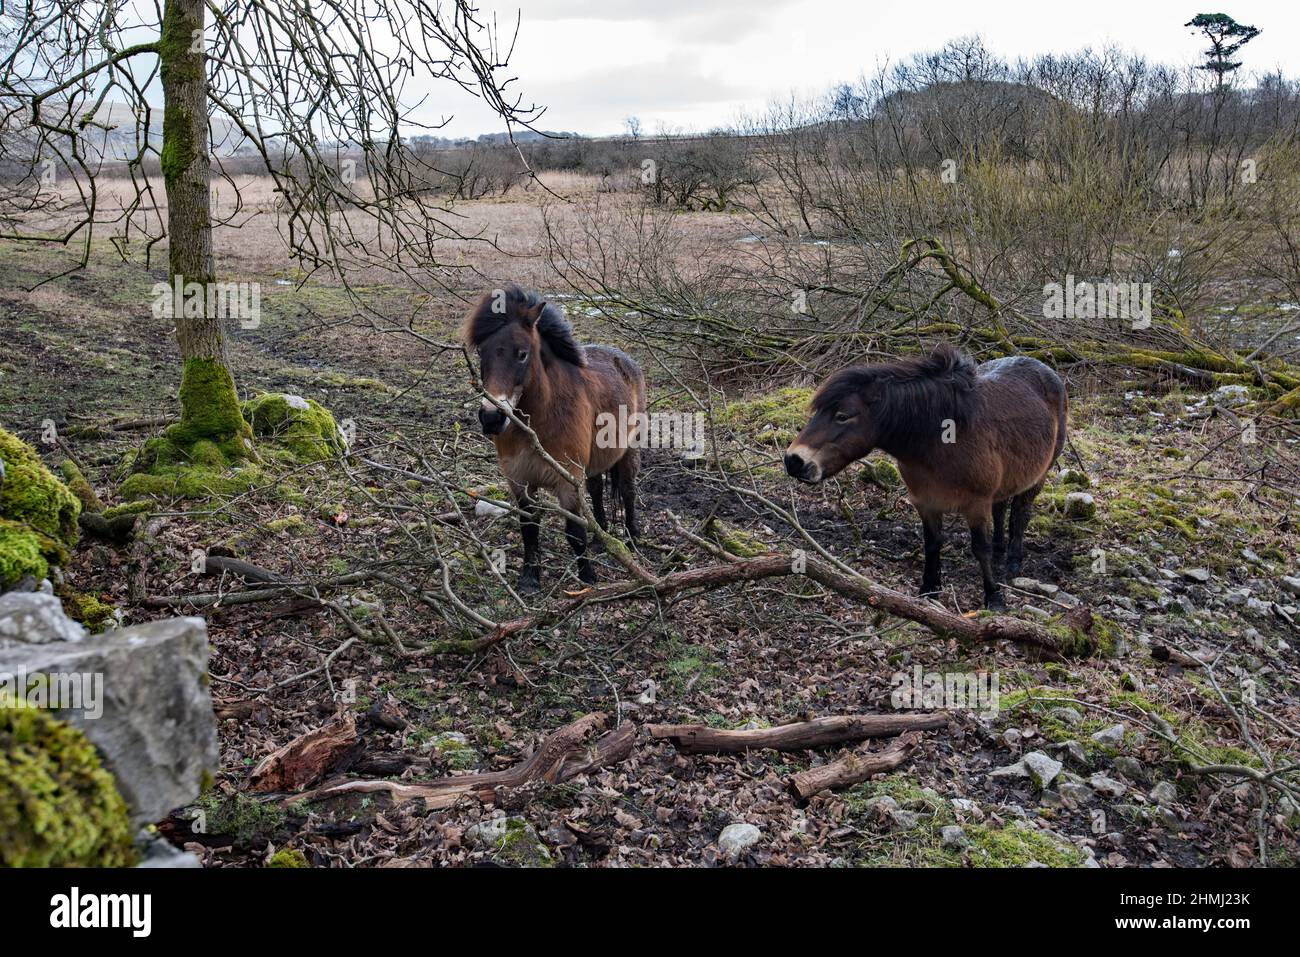 Britain’s oldest breed of native pony on loan to Malham Tarn estate for purposes of managing plants & habitat on Site of Special Scientific Interest. Stock Photo